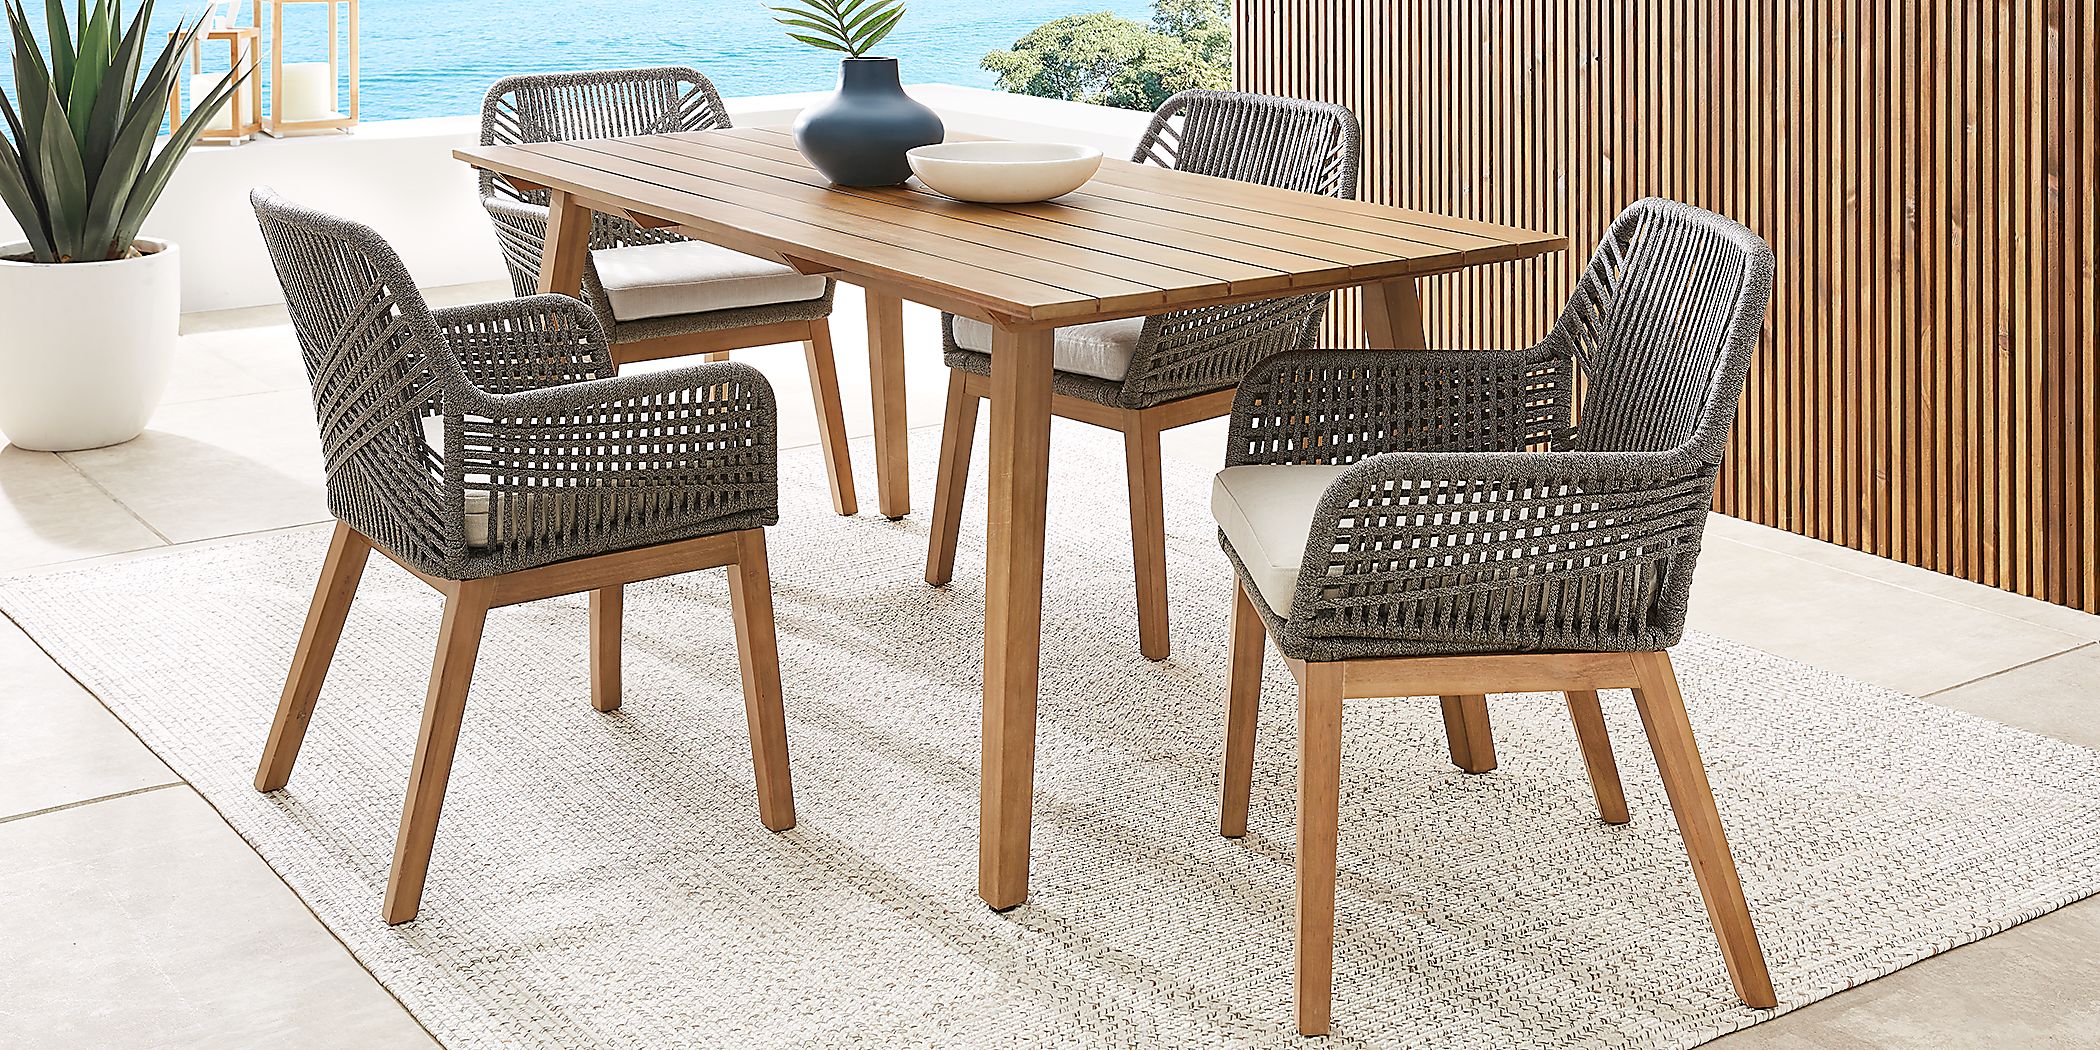 Tessere 5 Pc Natural Outdoor Dining Set with Gray Arm Chairs